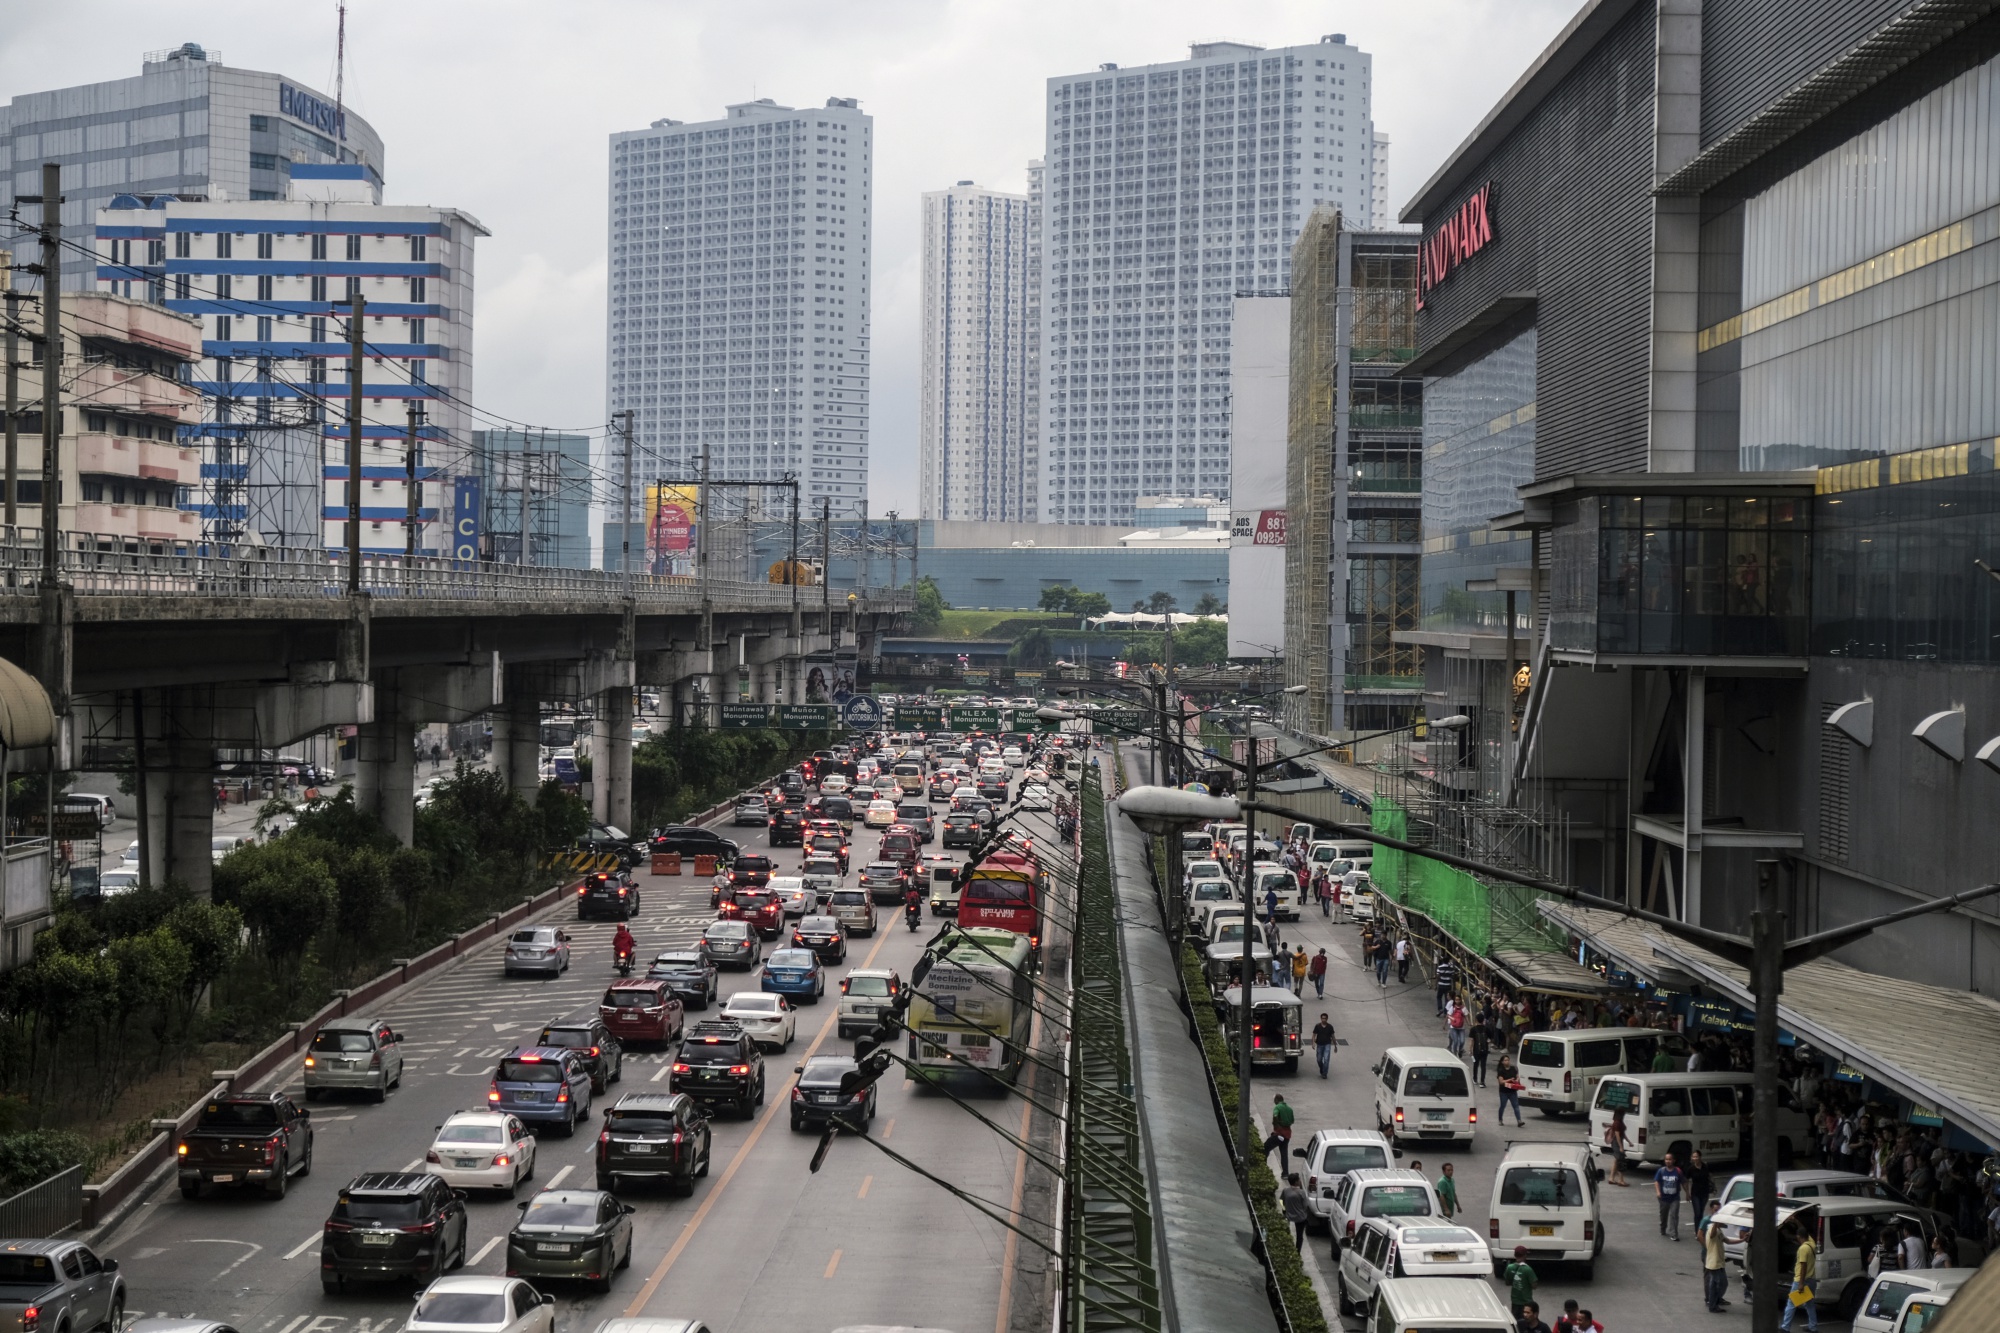 Vehicles travel along a road during rush hour in Manila.